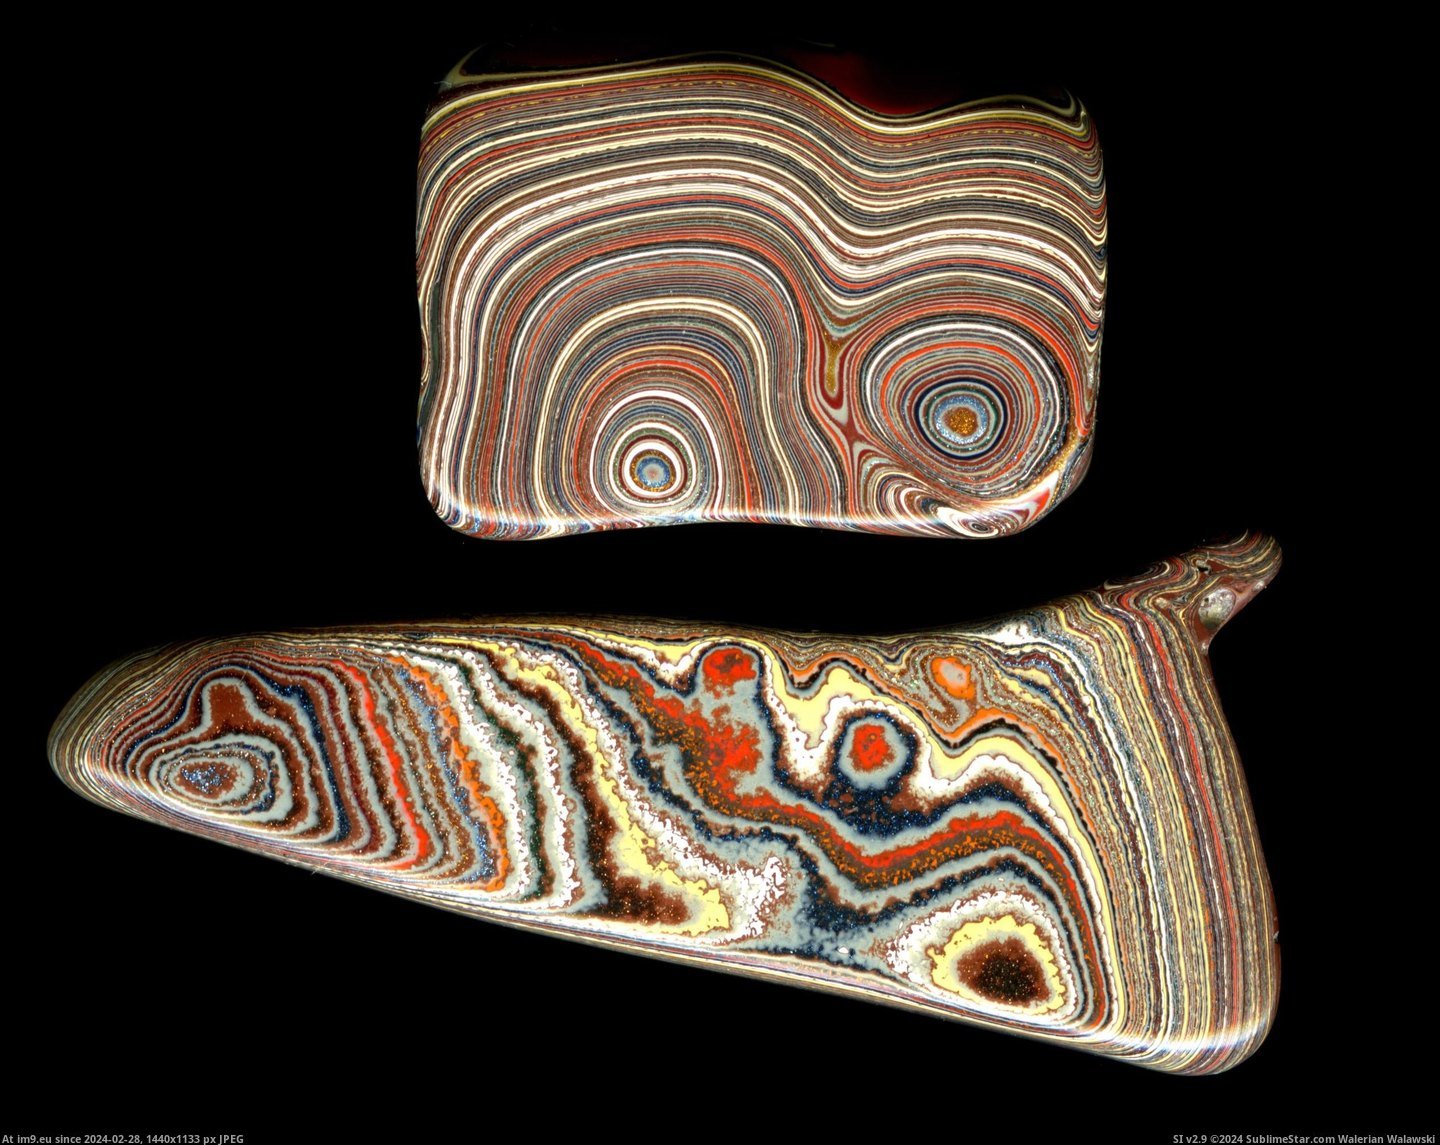 #Paint #Cars #Layers #Thousands #Agate #Enamel #Fordite #Baked #Detroit #Repeatedly [Pics] This is Fordite, or ''Detroit agate'', thousands of layers of repeatedly baked enamel paint from the days when cars were  Pic. (Изображение из альбом My r/PICS favs))